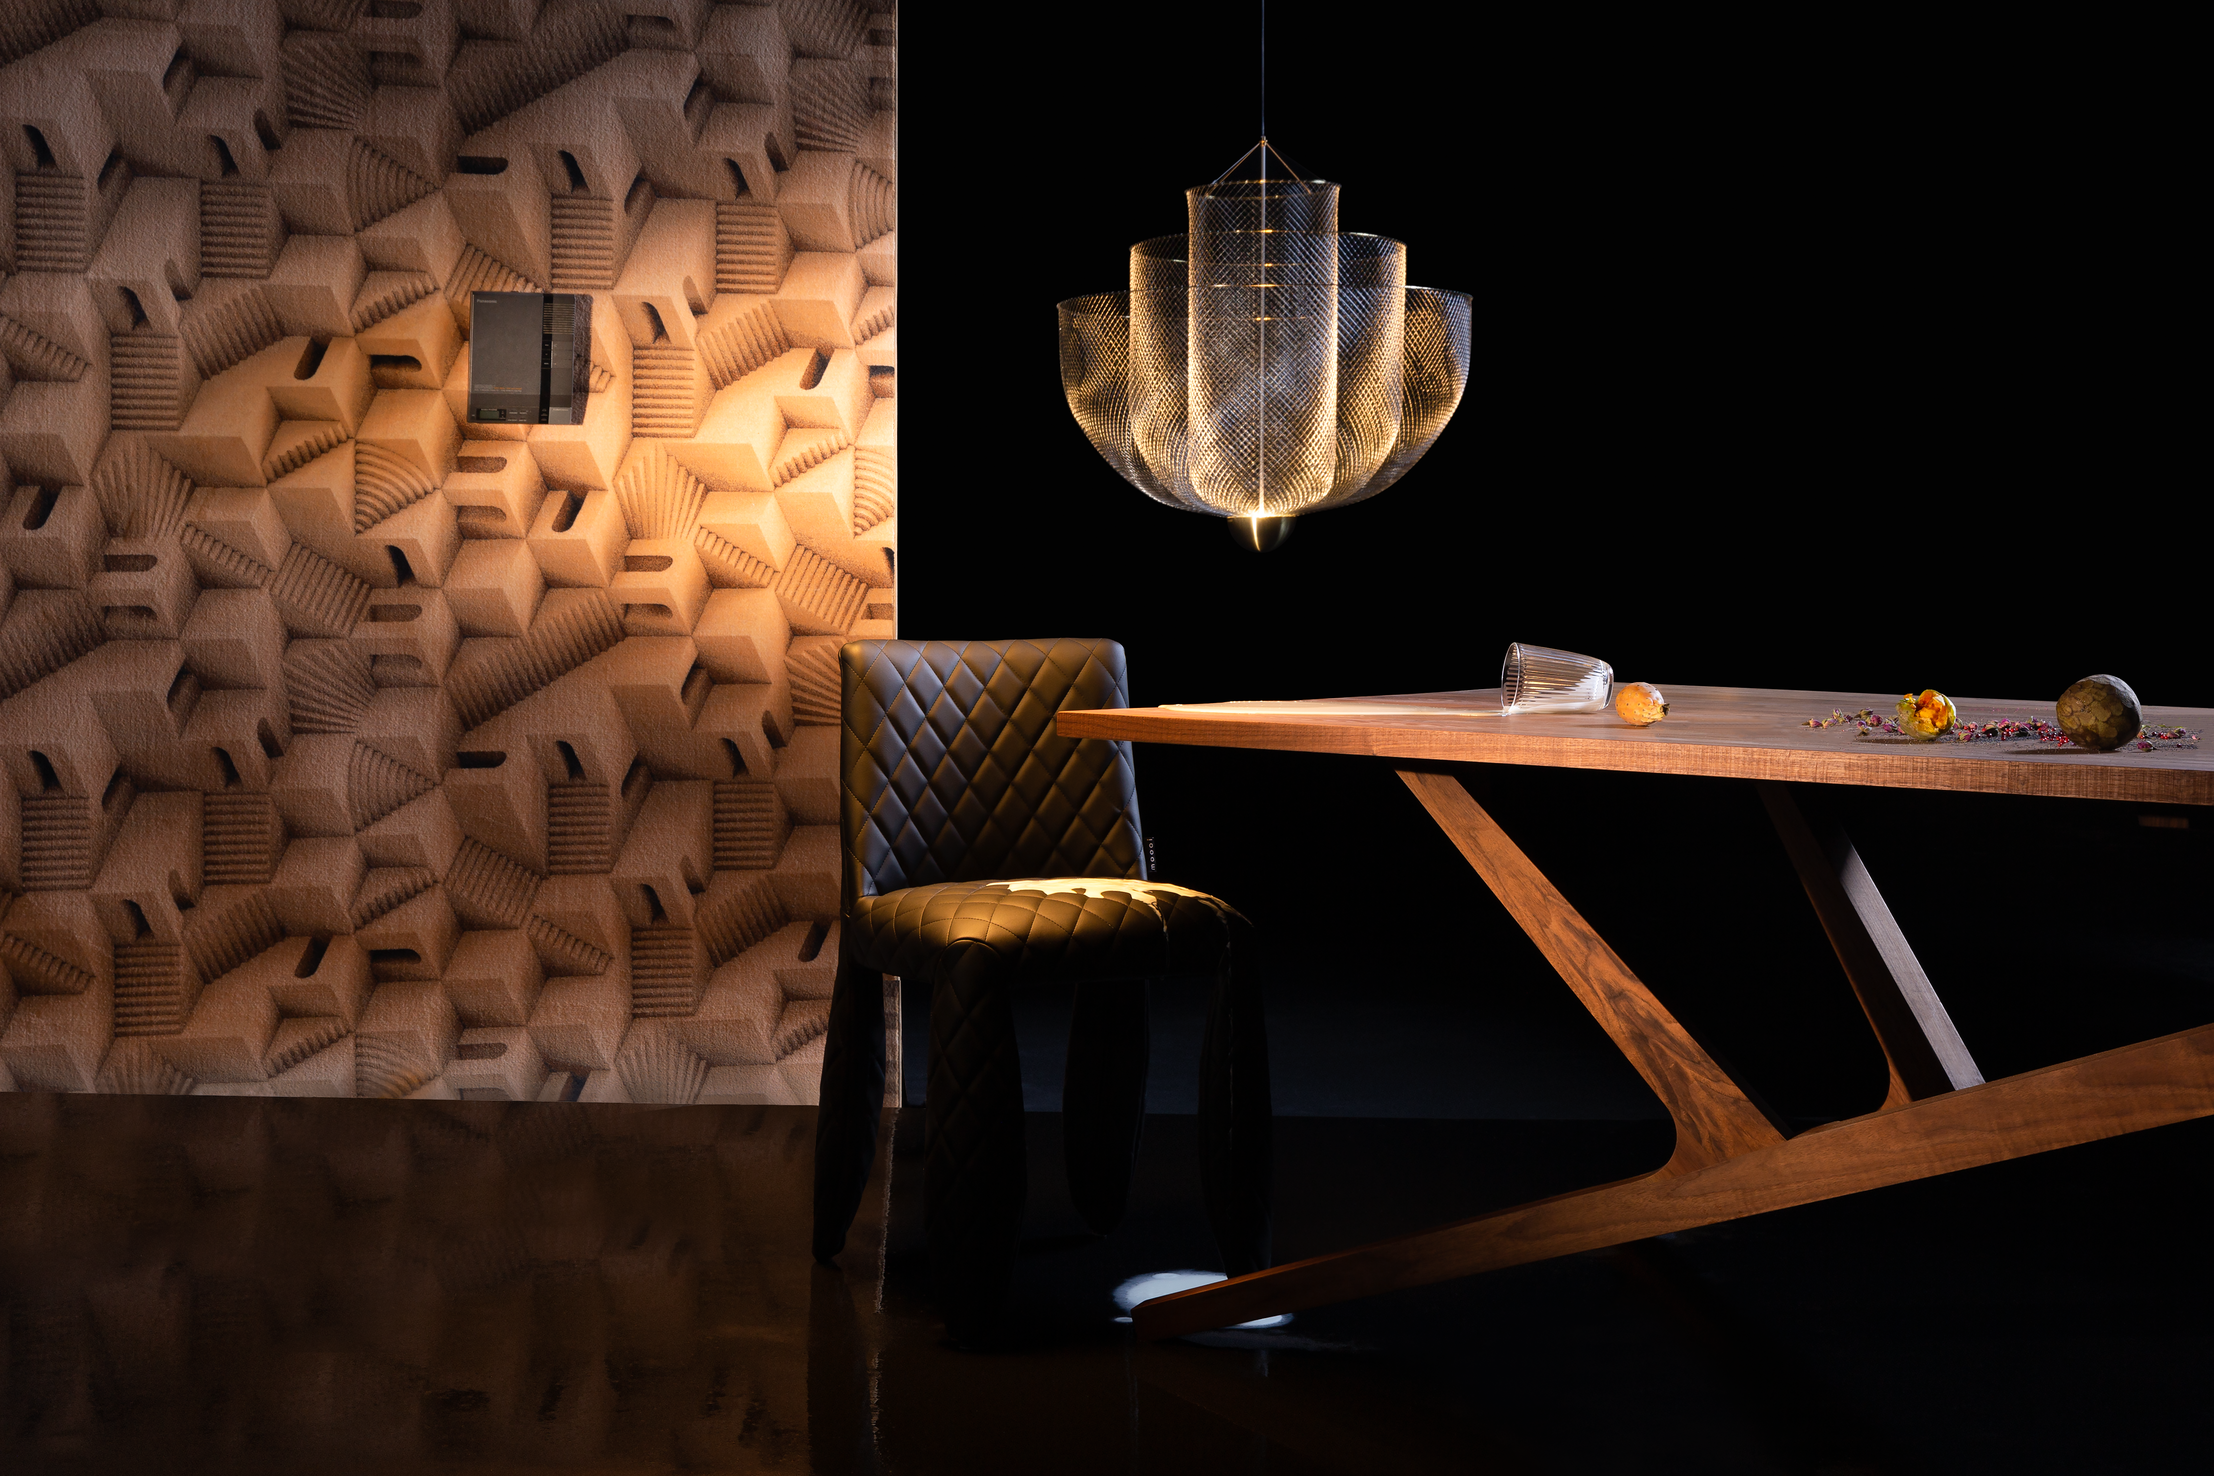 Poetic composition of Monster Chair, Liberty Table, Meshmatics Chandelier and Moooi Wallcovering